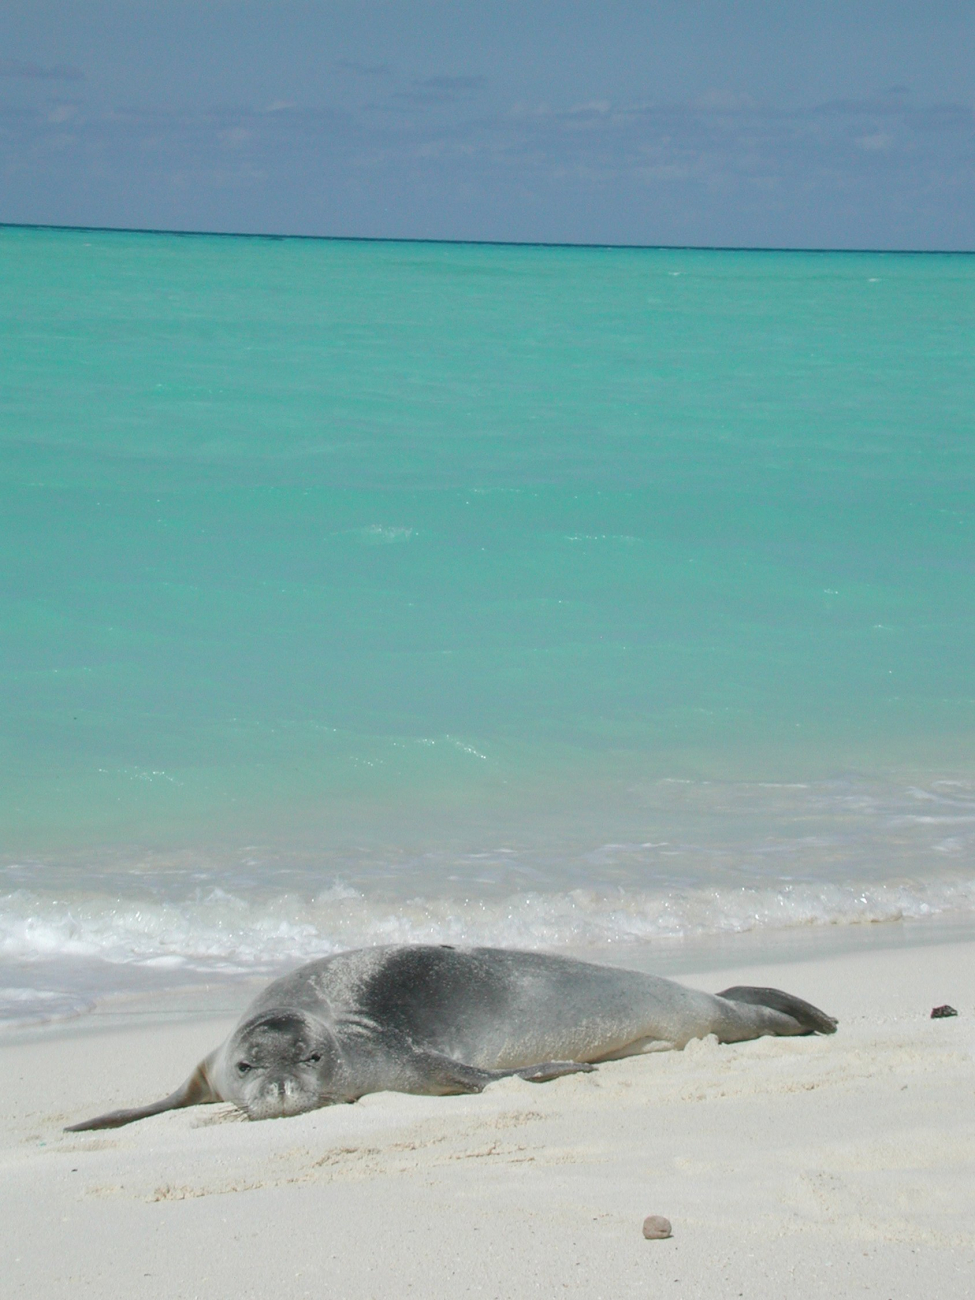 Several monk seals were spotted on Midway Island where the science partyspent two days waiting for their flight back to Honolulu